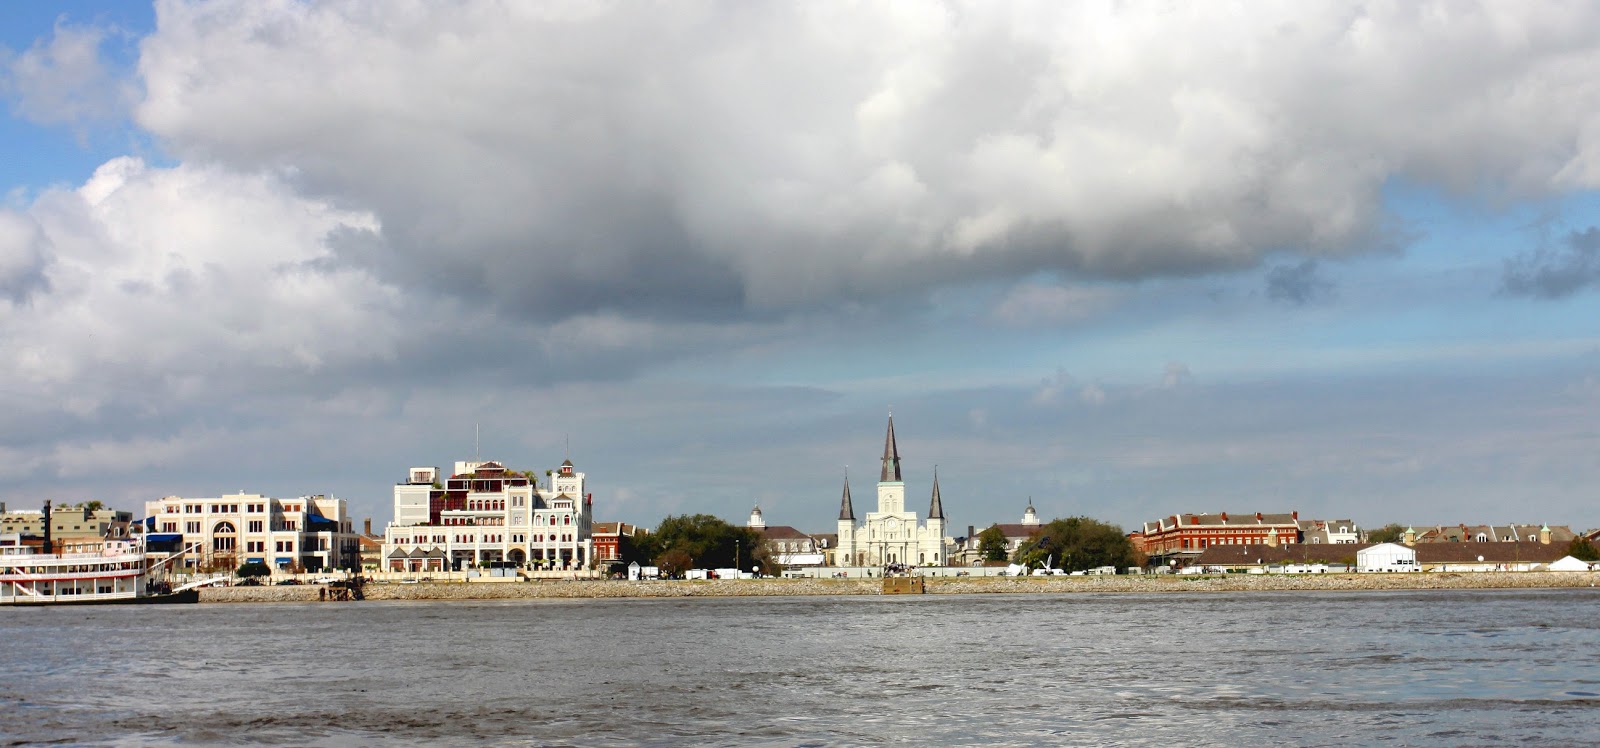 New Orleans Eclectics: Mississippi River / New Orleans Skyline / The